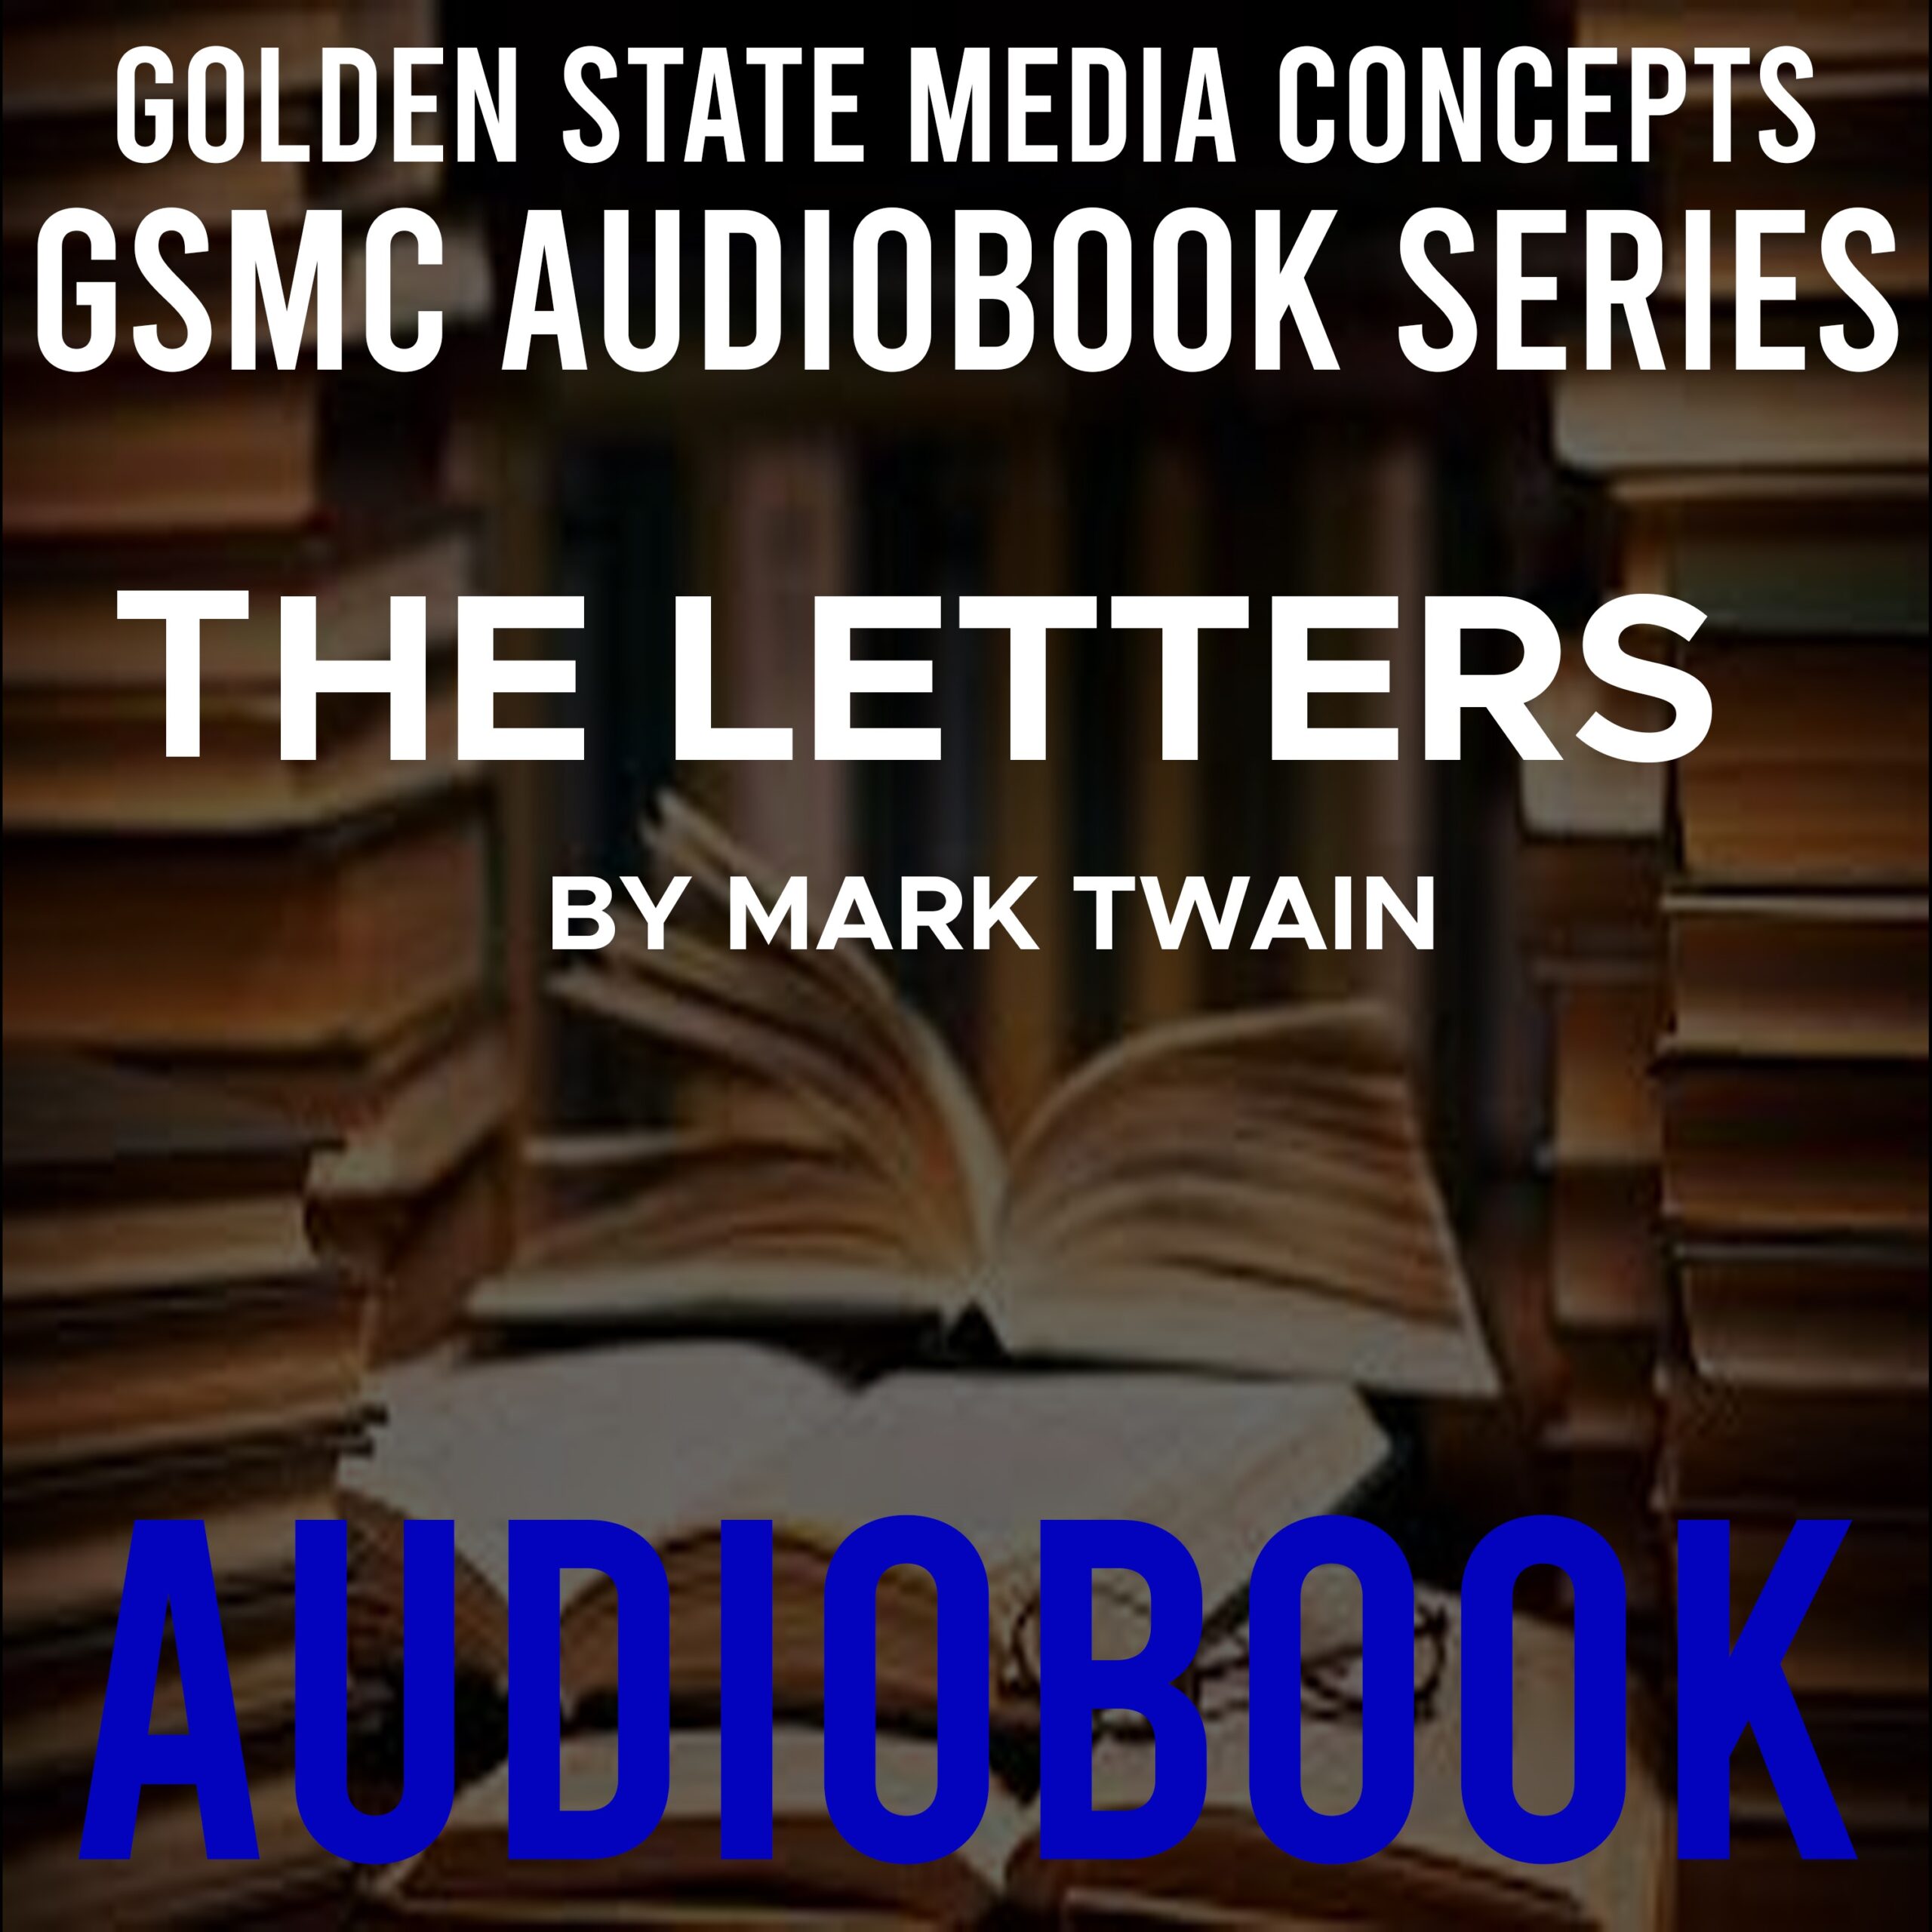 GSMC Audiobook Series: The Letters of Mark Twain